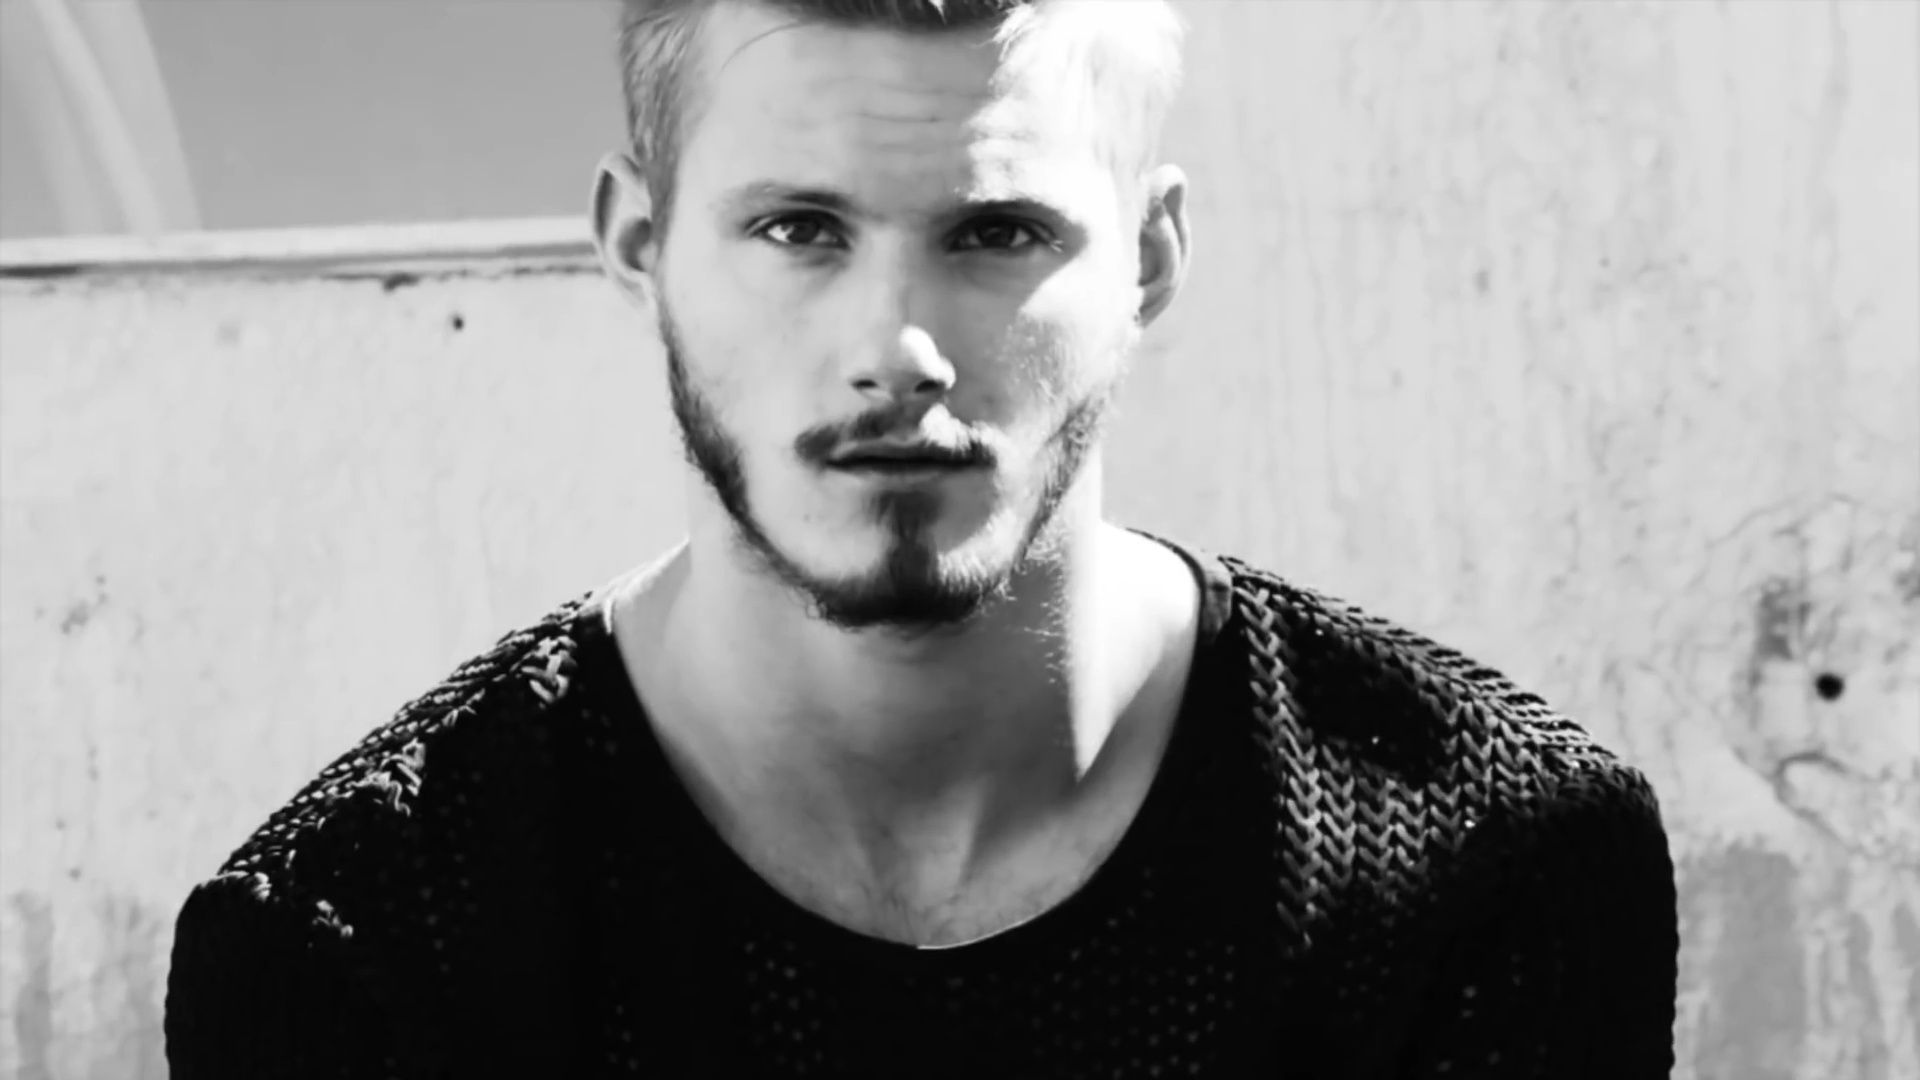 RE: Alexander Ludwig incl shirtless & tighty whities bulge x33 + video....